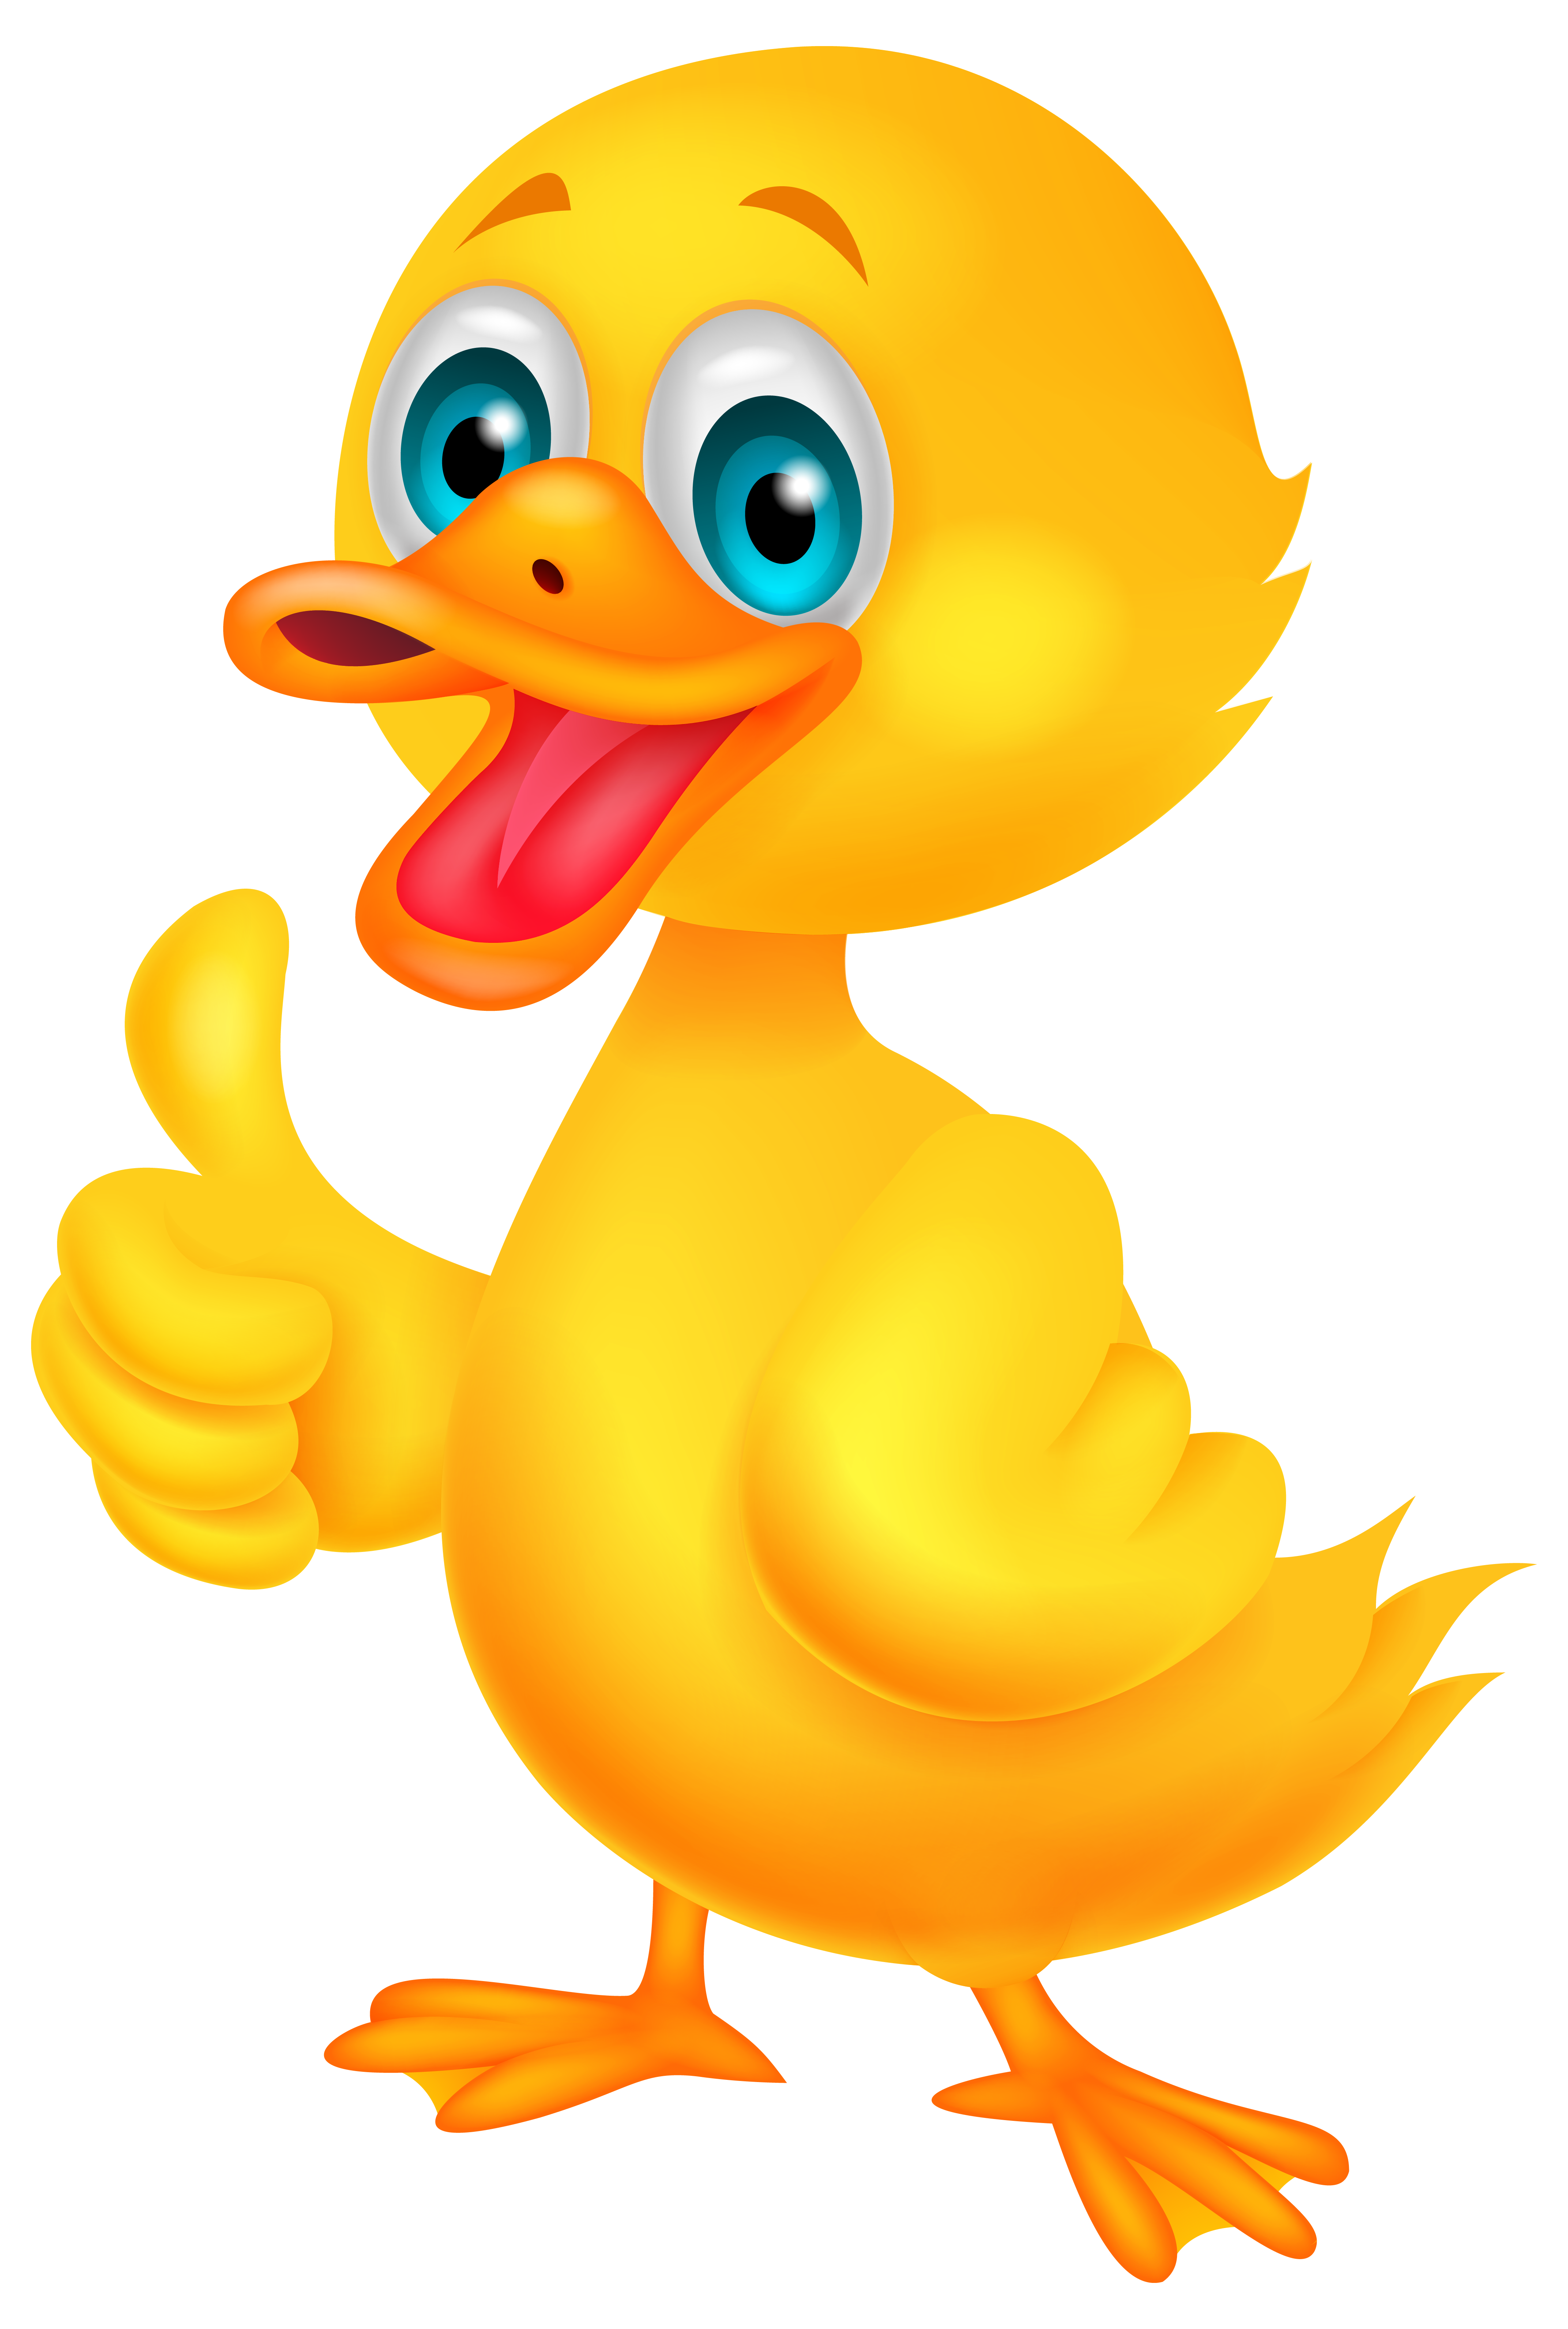 Pink clipart rubber ducky. Cartoon duck toy animal